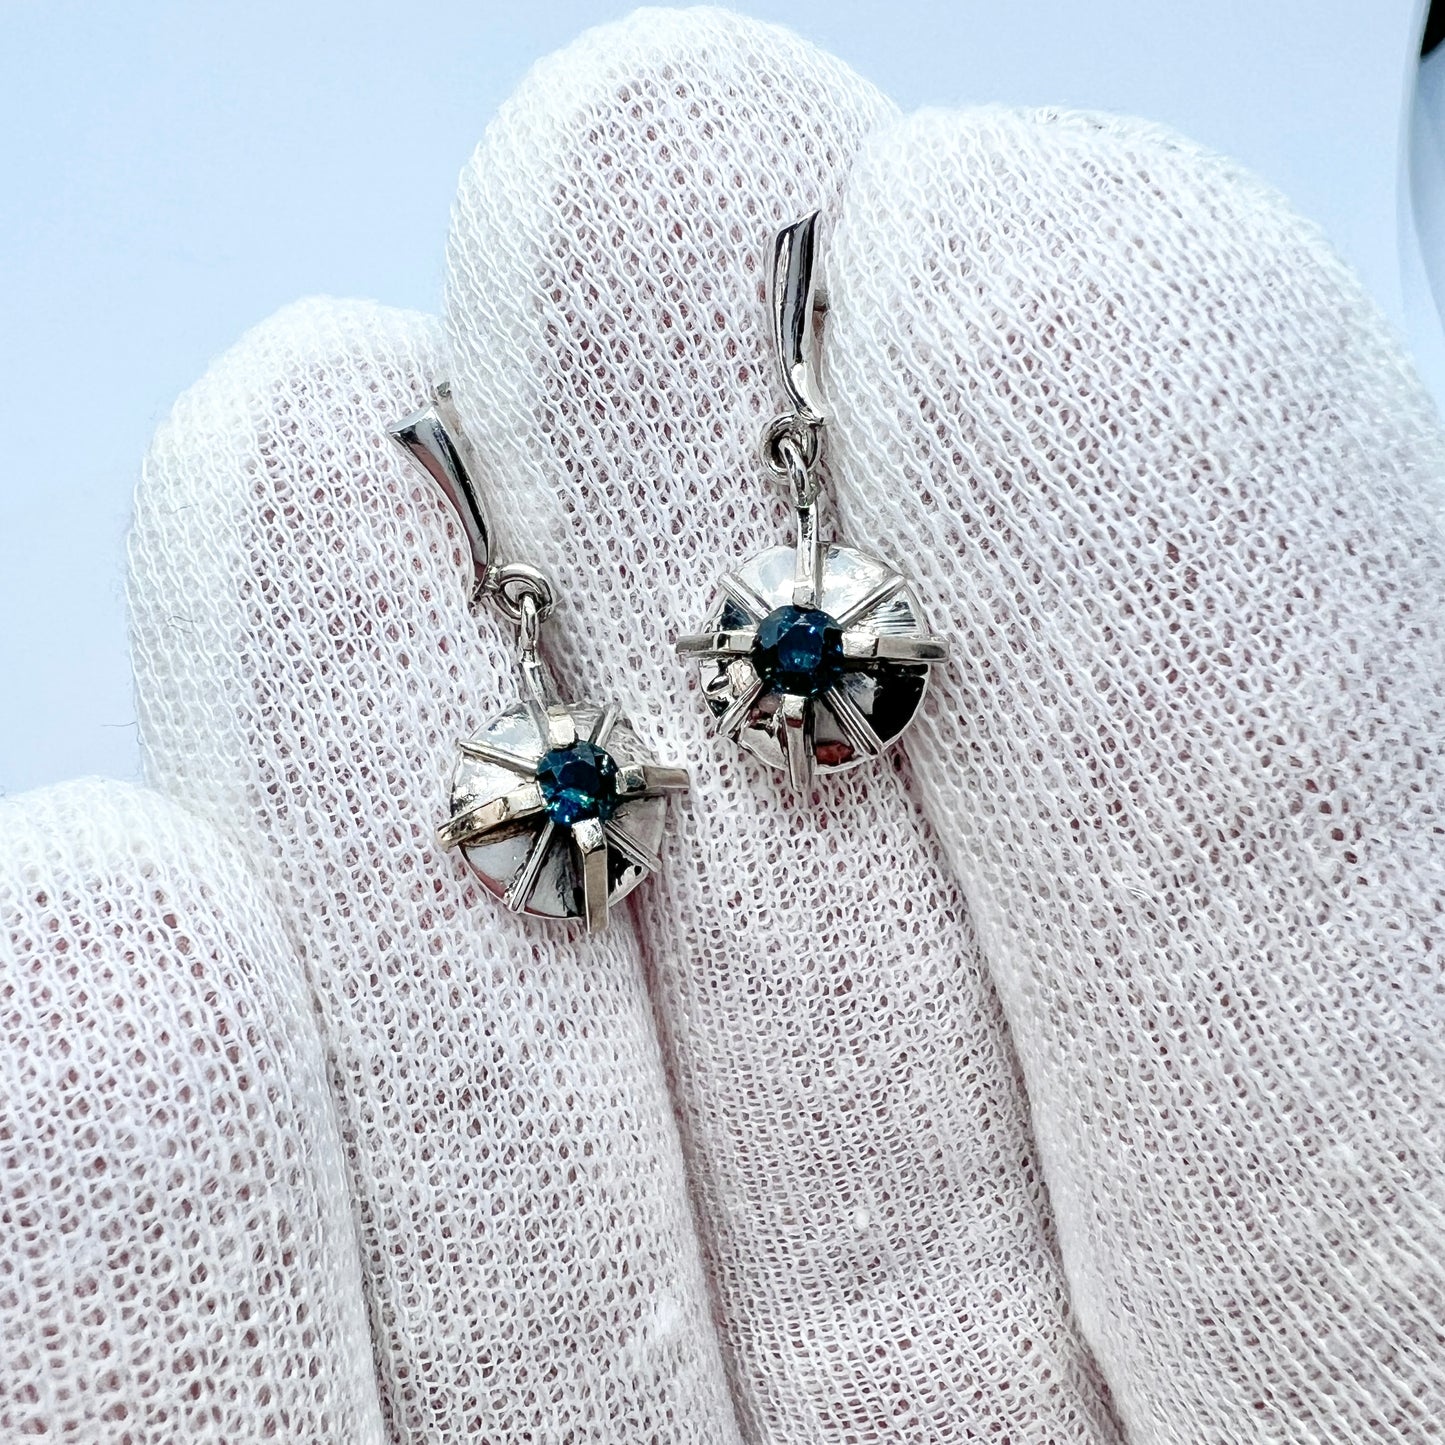 Vintage 1960s Space Age 18k Gold White Gold Sapphire Earrings.